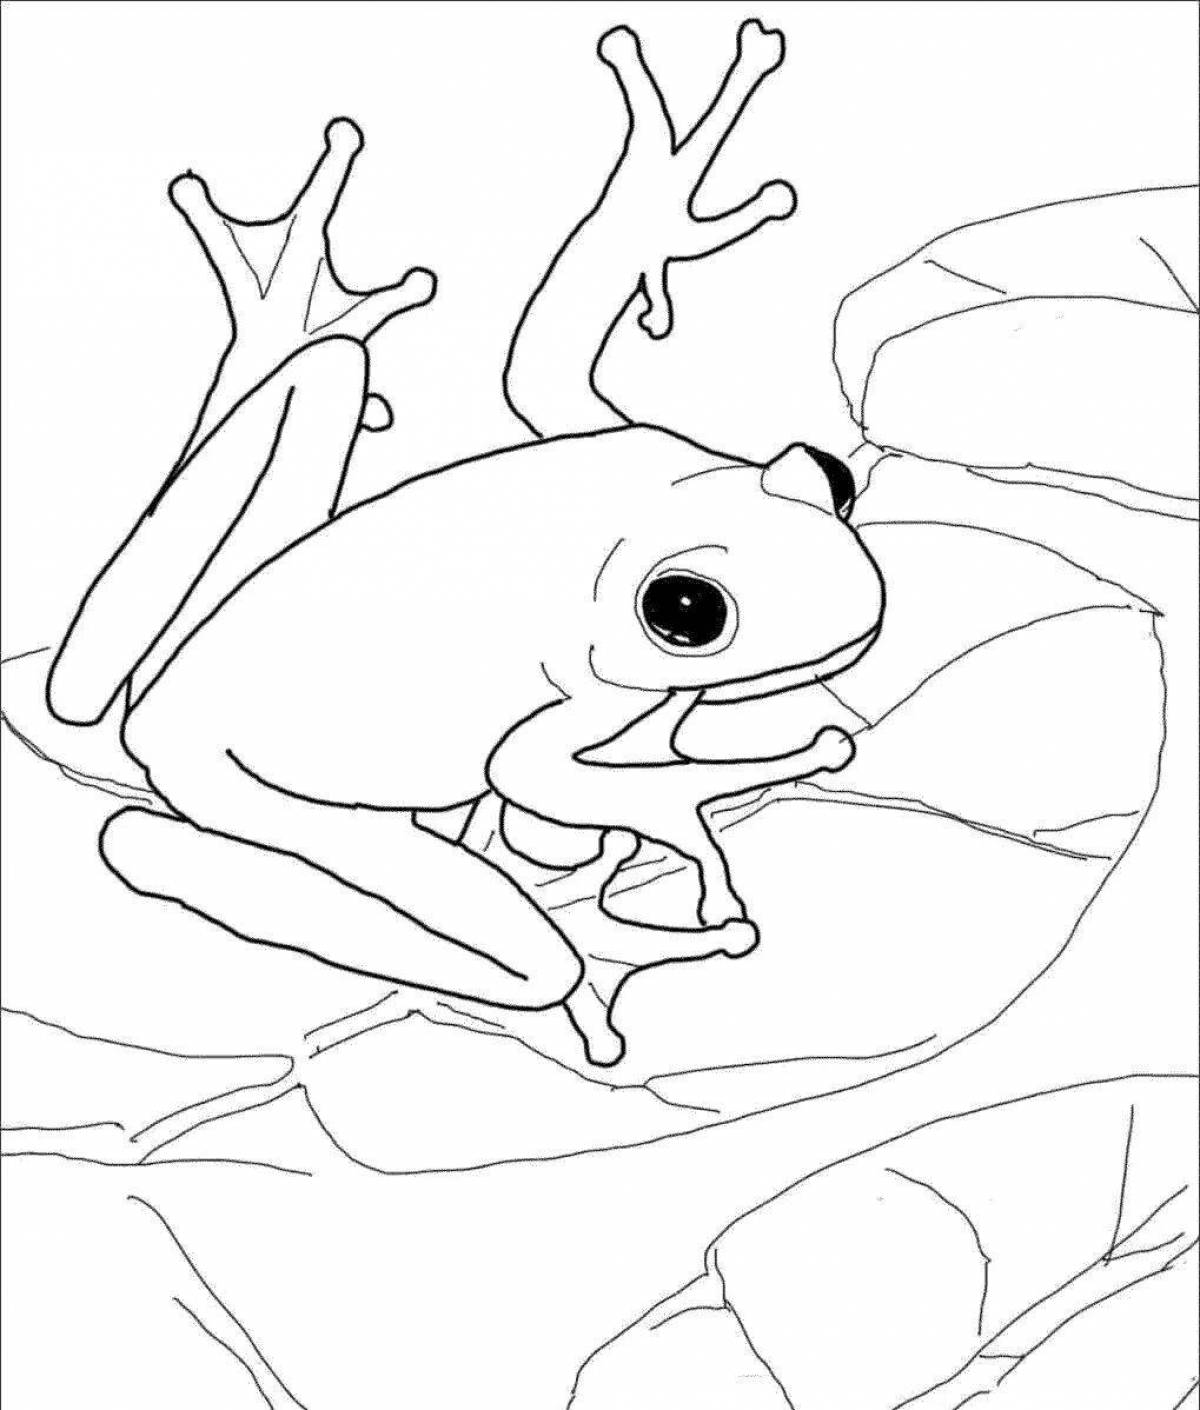 Colorful frog aesthetic coloring page